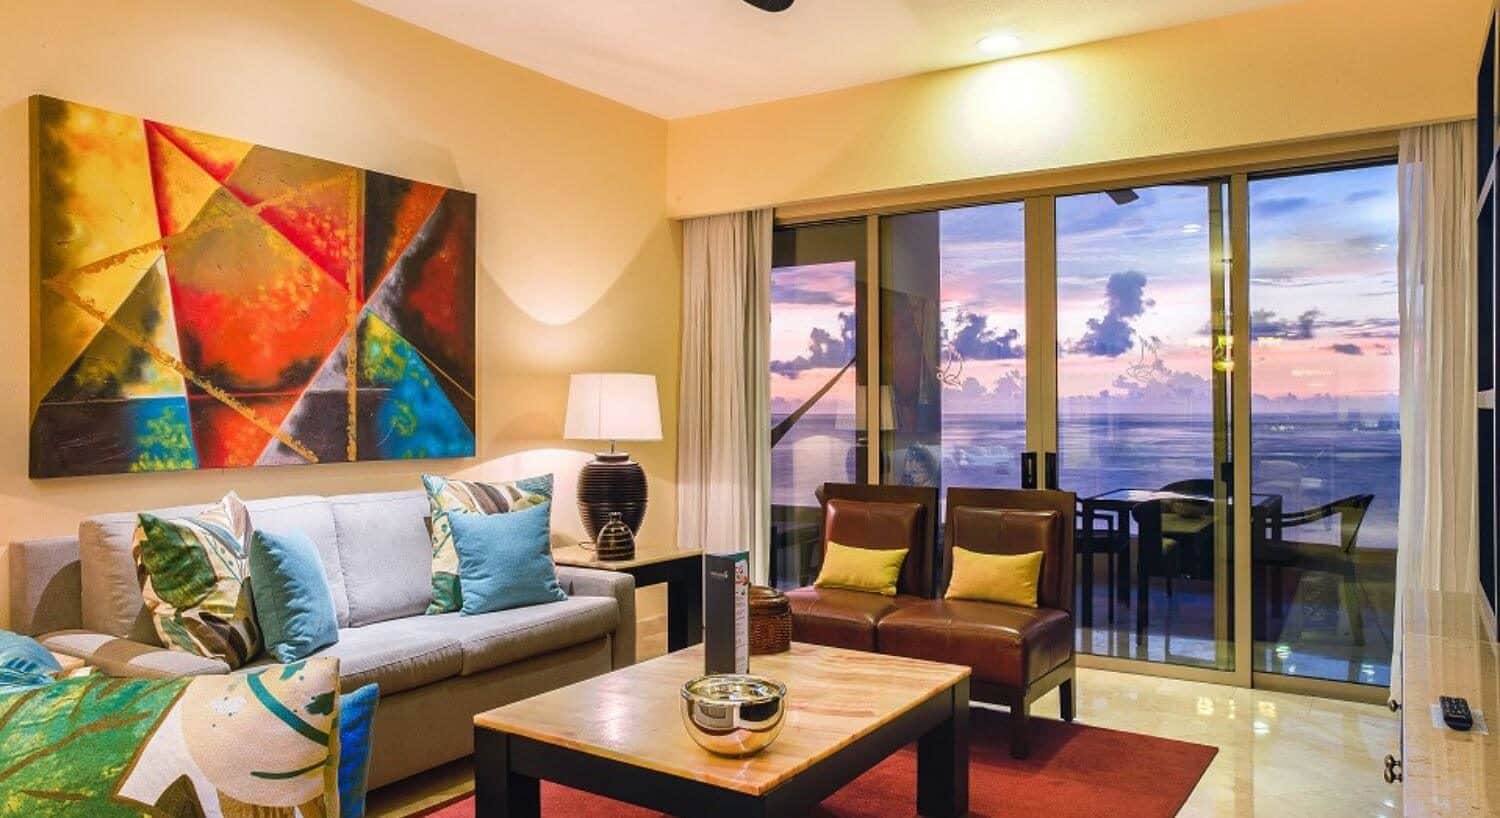 A living room with white sofas with green and blue throw pillows, two leather chairs with yellow throw pillows, marble coffee table and end table with a lamp, and sliding doors leading out to a private balcony with outdoor dining furniture and the purple and pink sunset over the ocean.